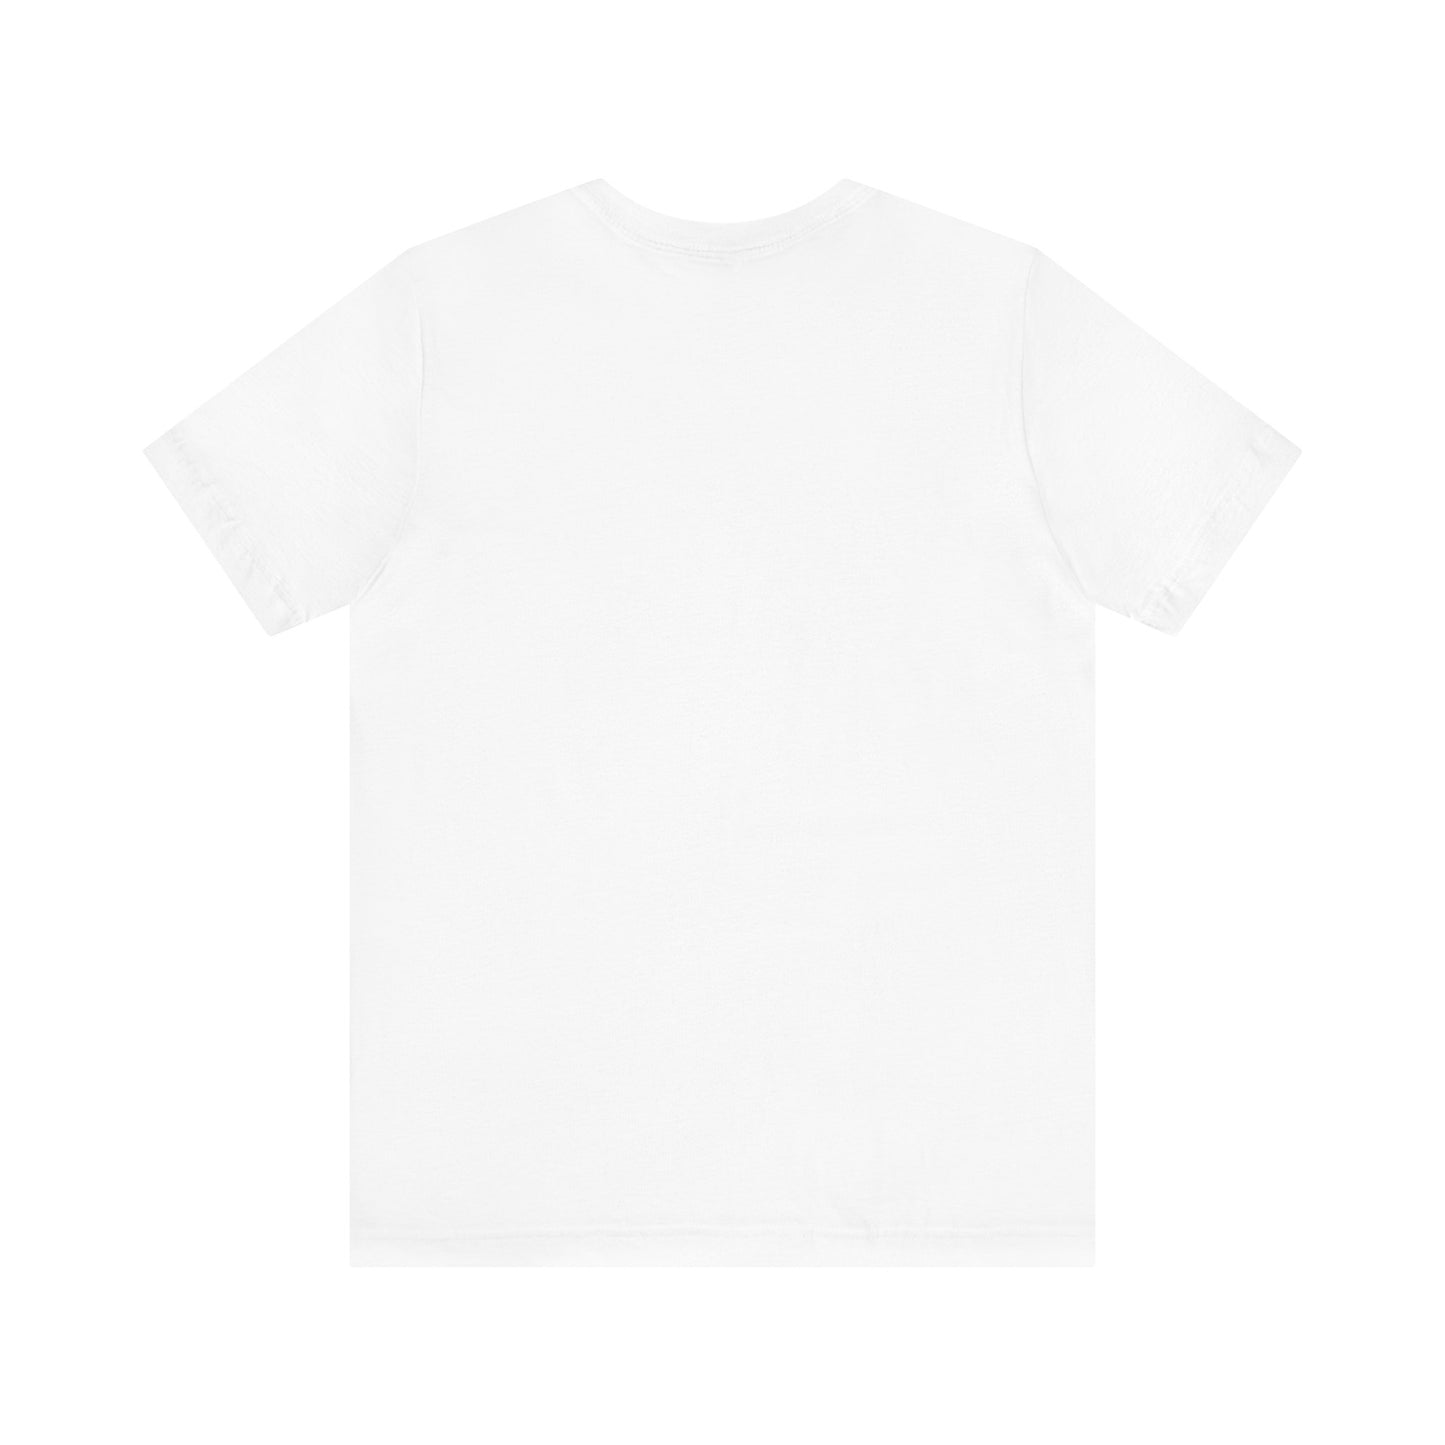 "Ethereal" Graphic T-Shirt